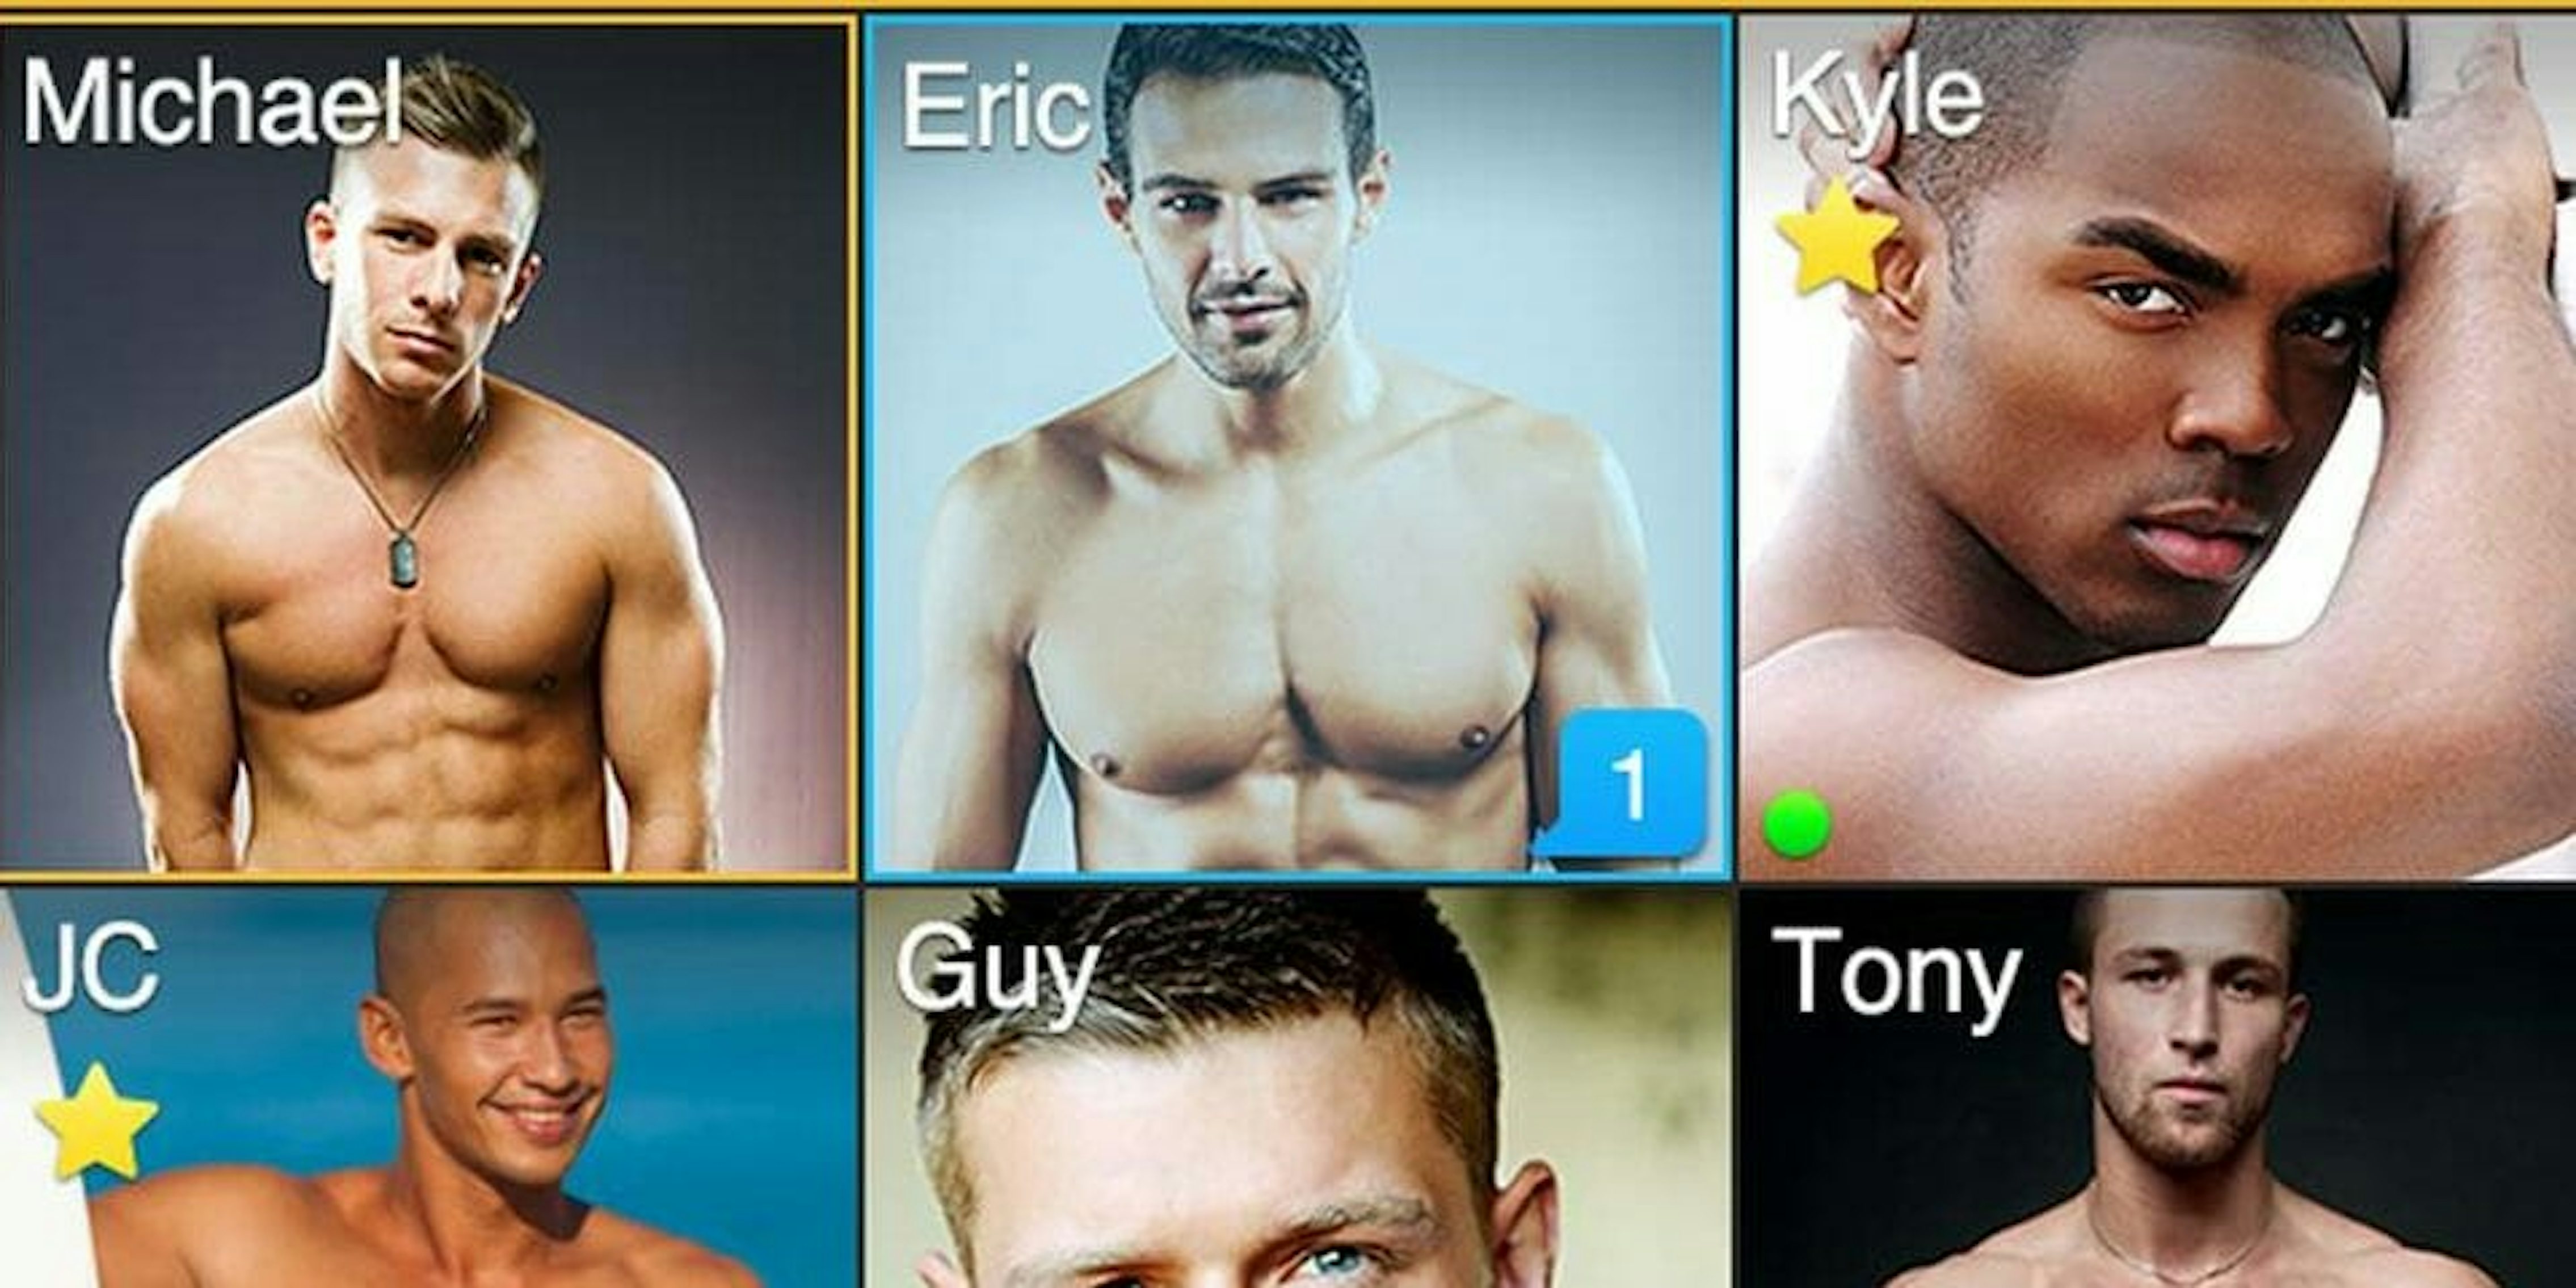 best gay dating sites